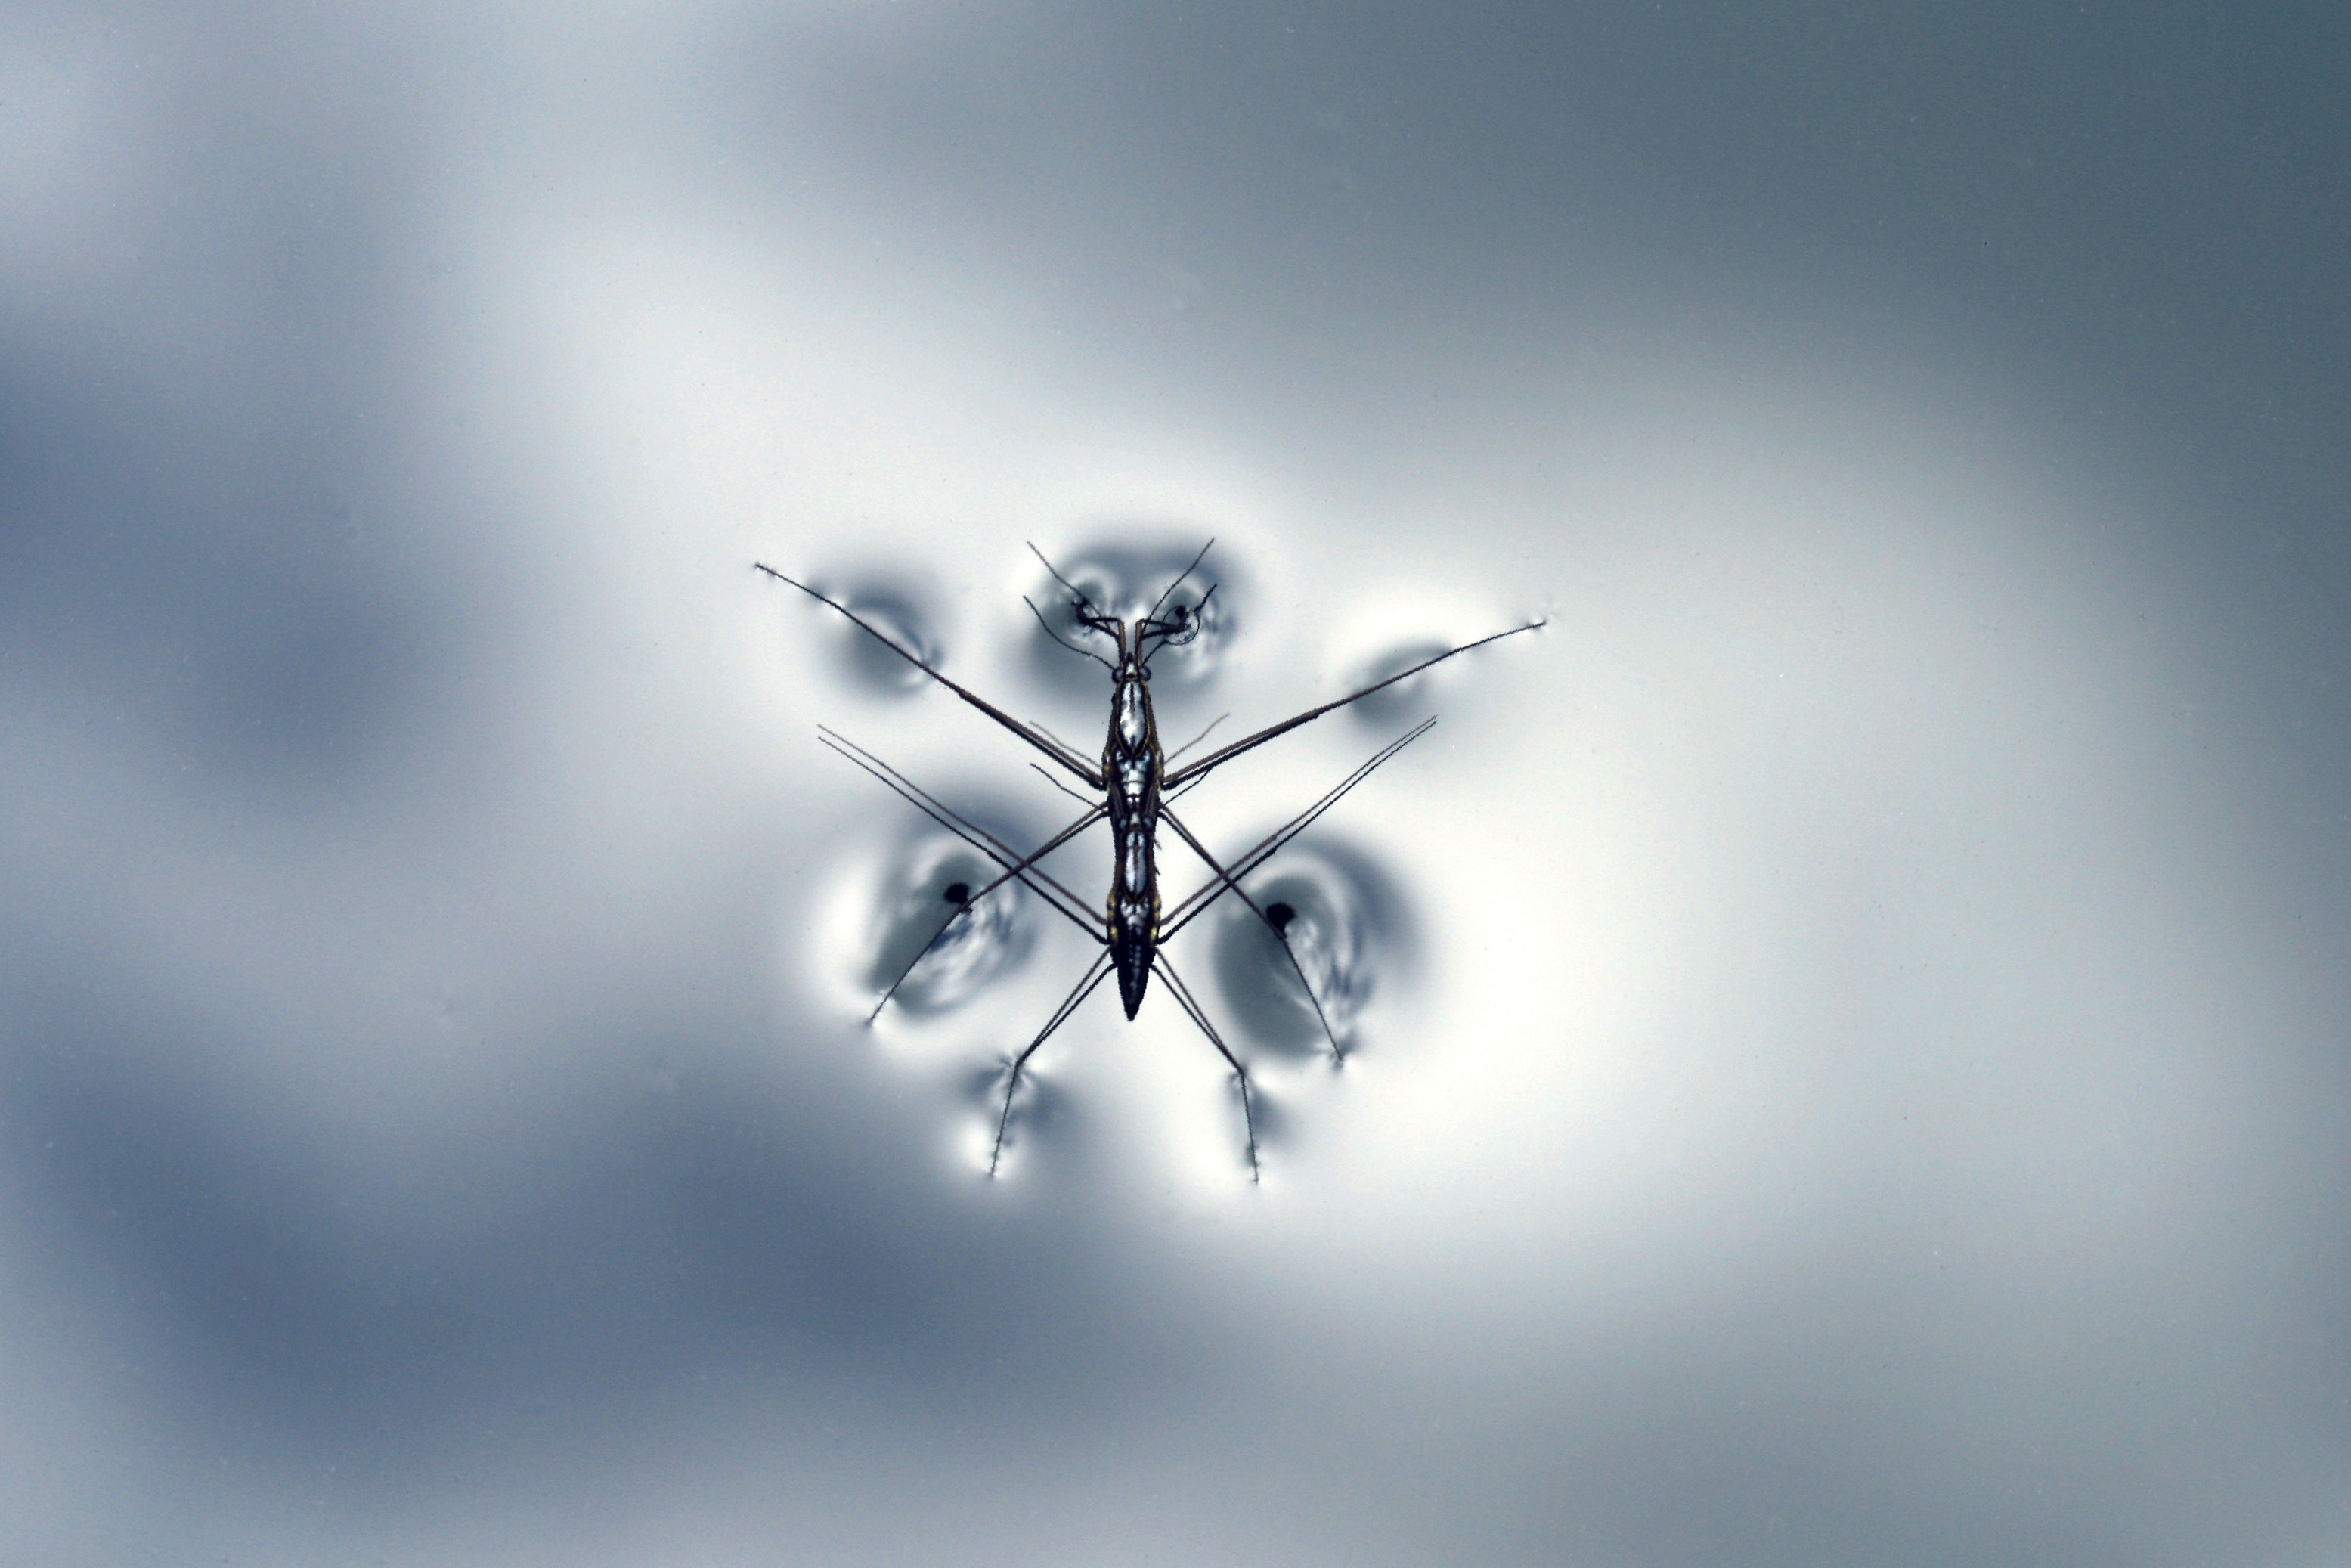 Insect floating on the surface of water